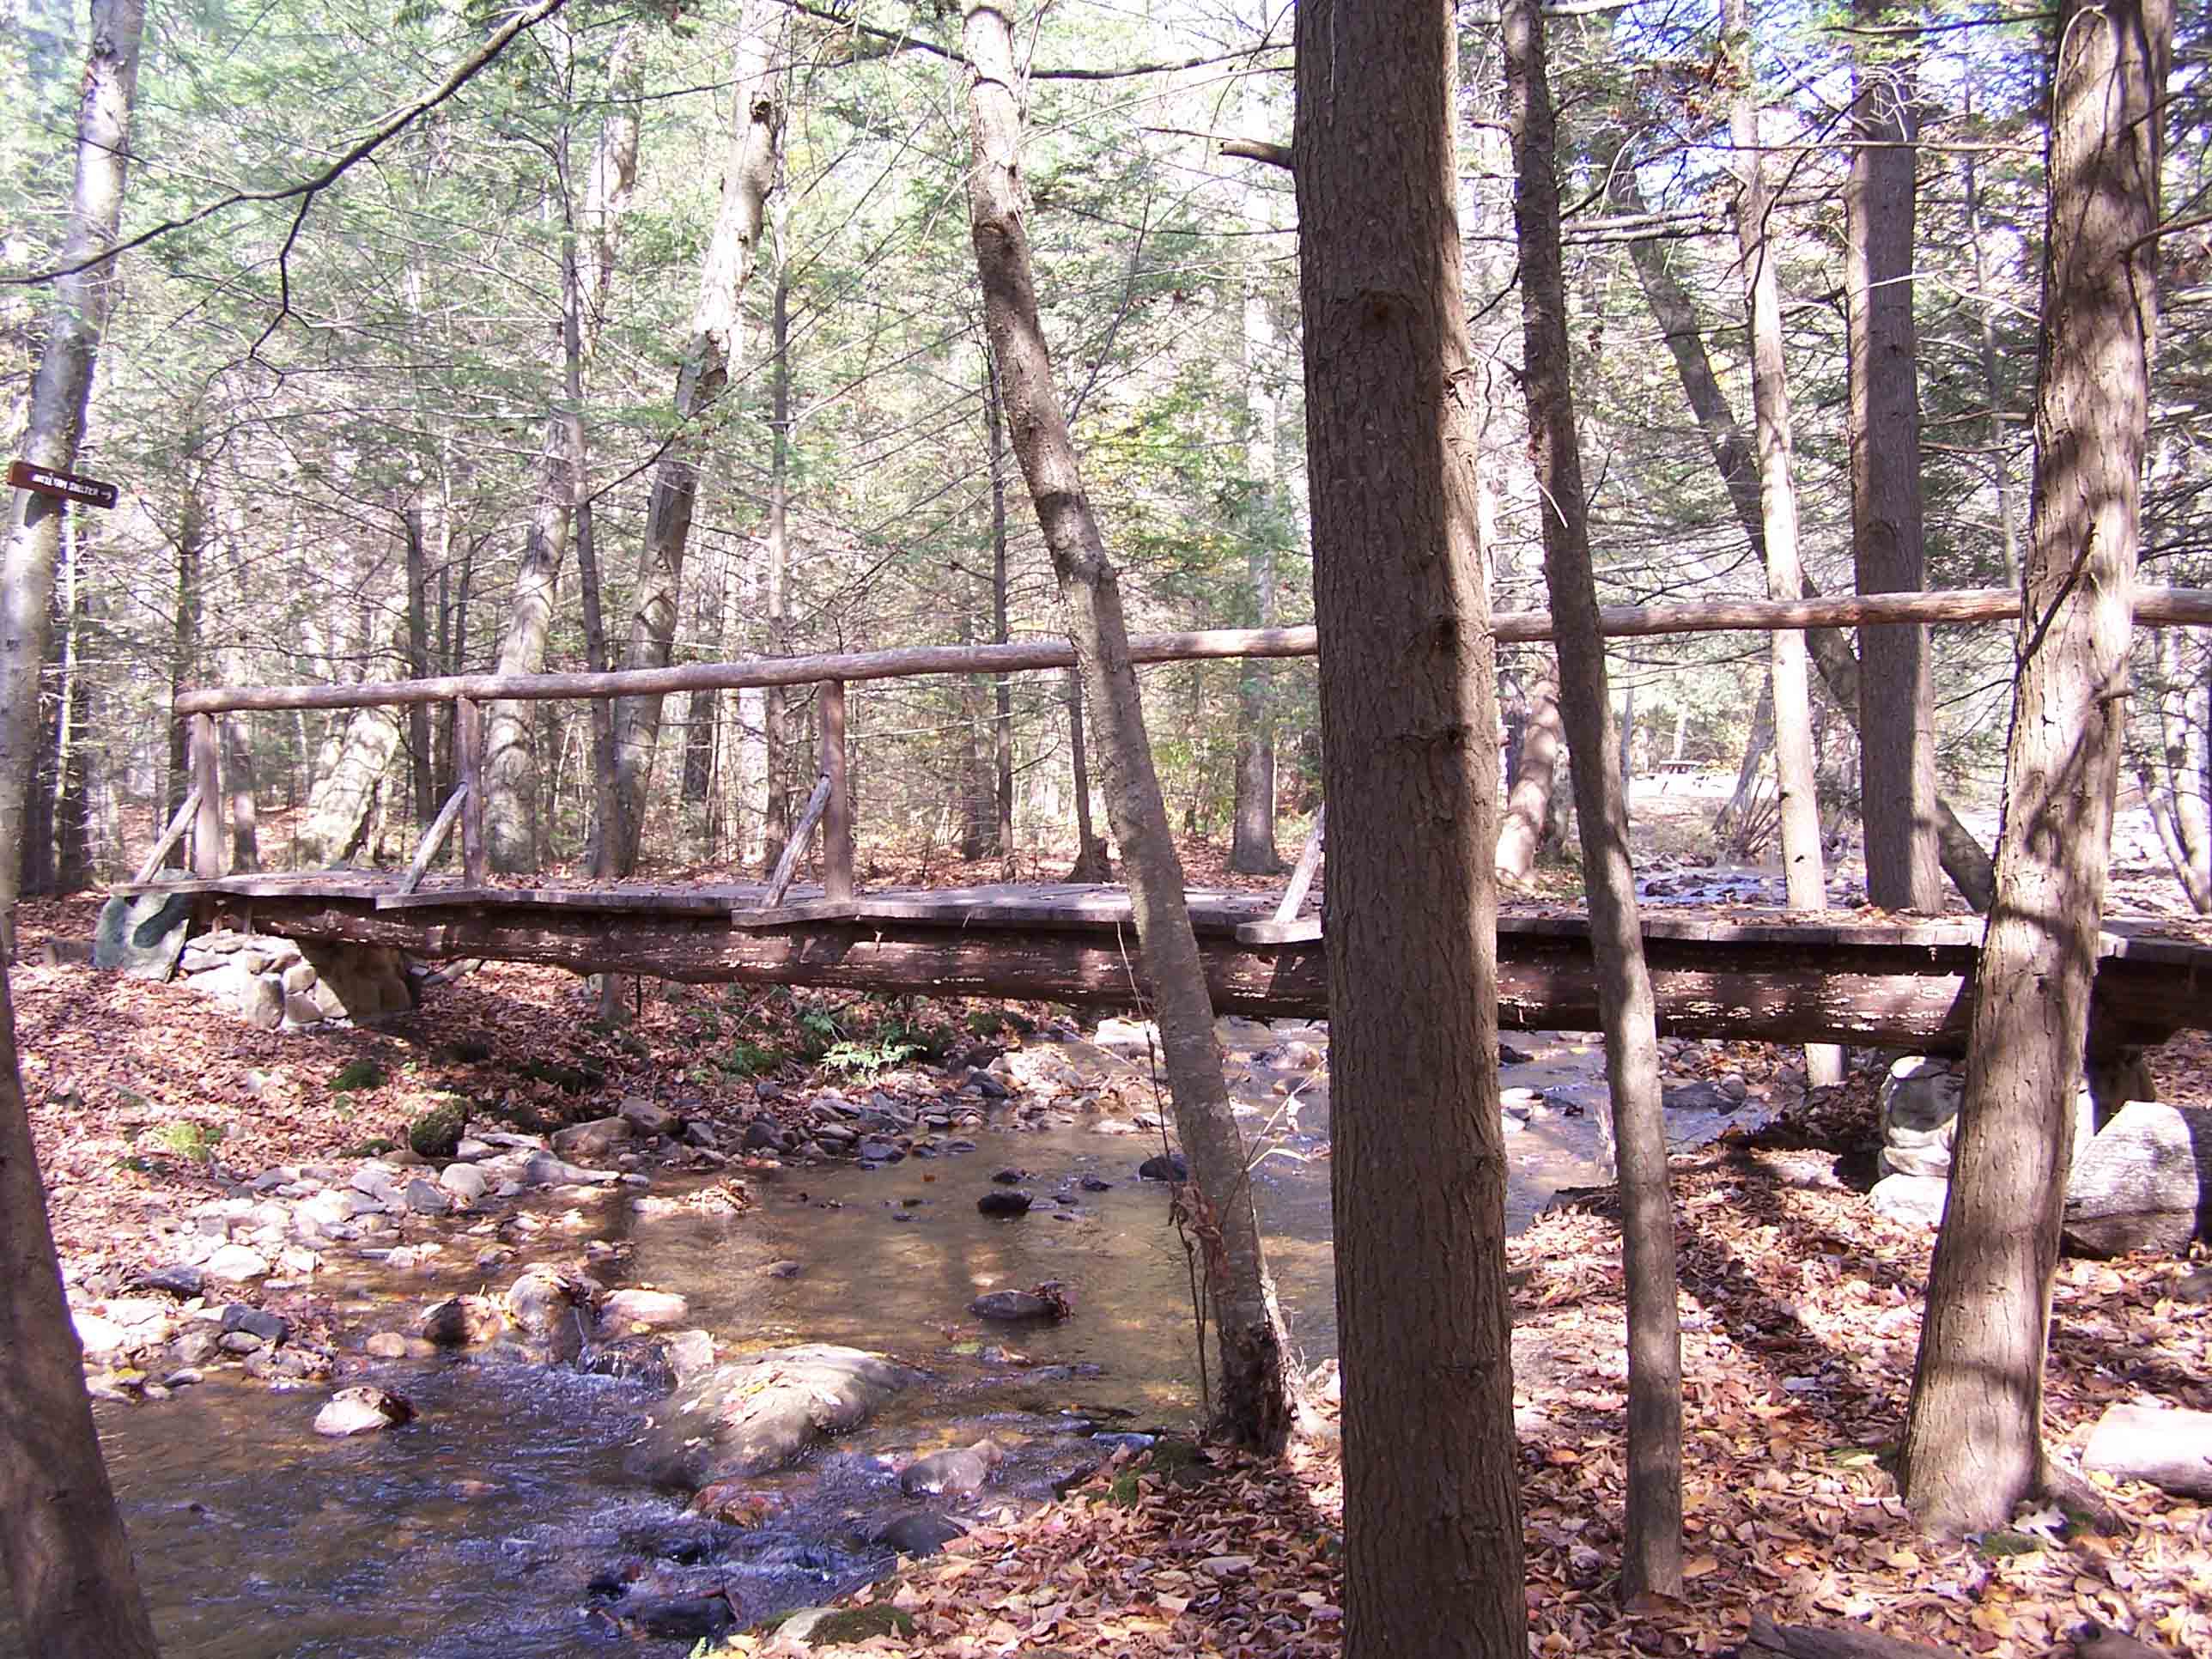 mm 10.8 One of two footbridges for crossing East Branch of Antietam Creek. Courtesy at@rohland.org